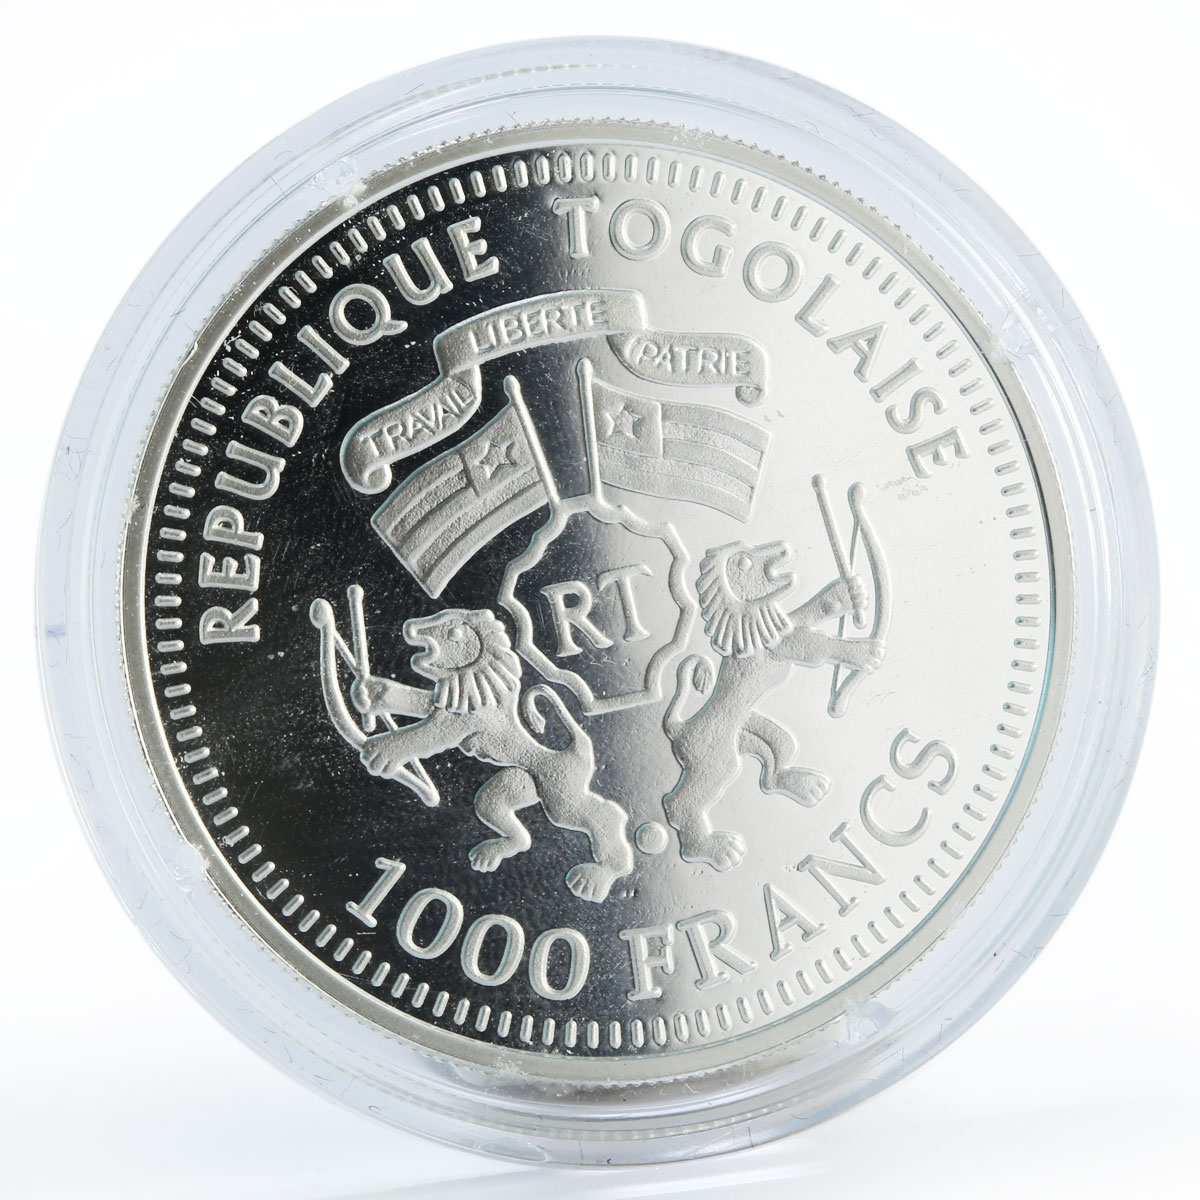 Togo 1000 francs 170th Anniversary German Railroad Adler proof silver coin 2005